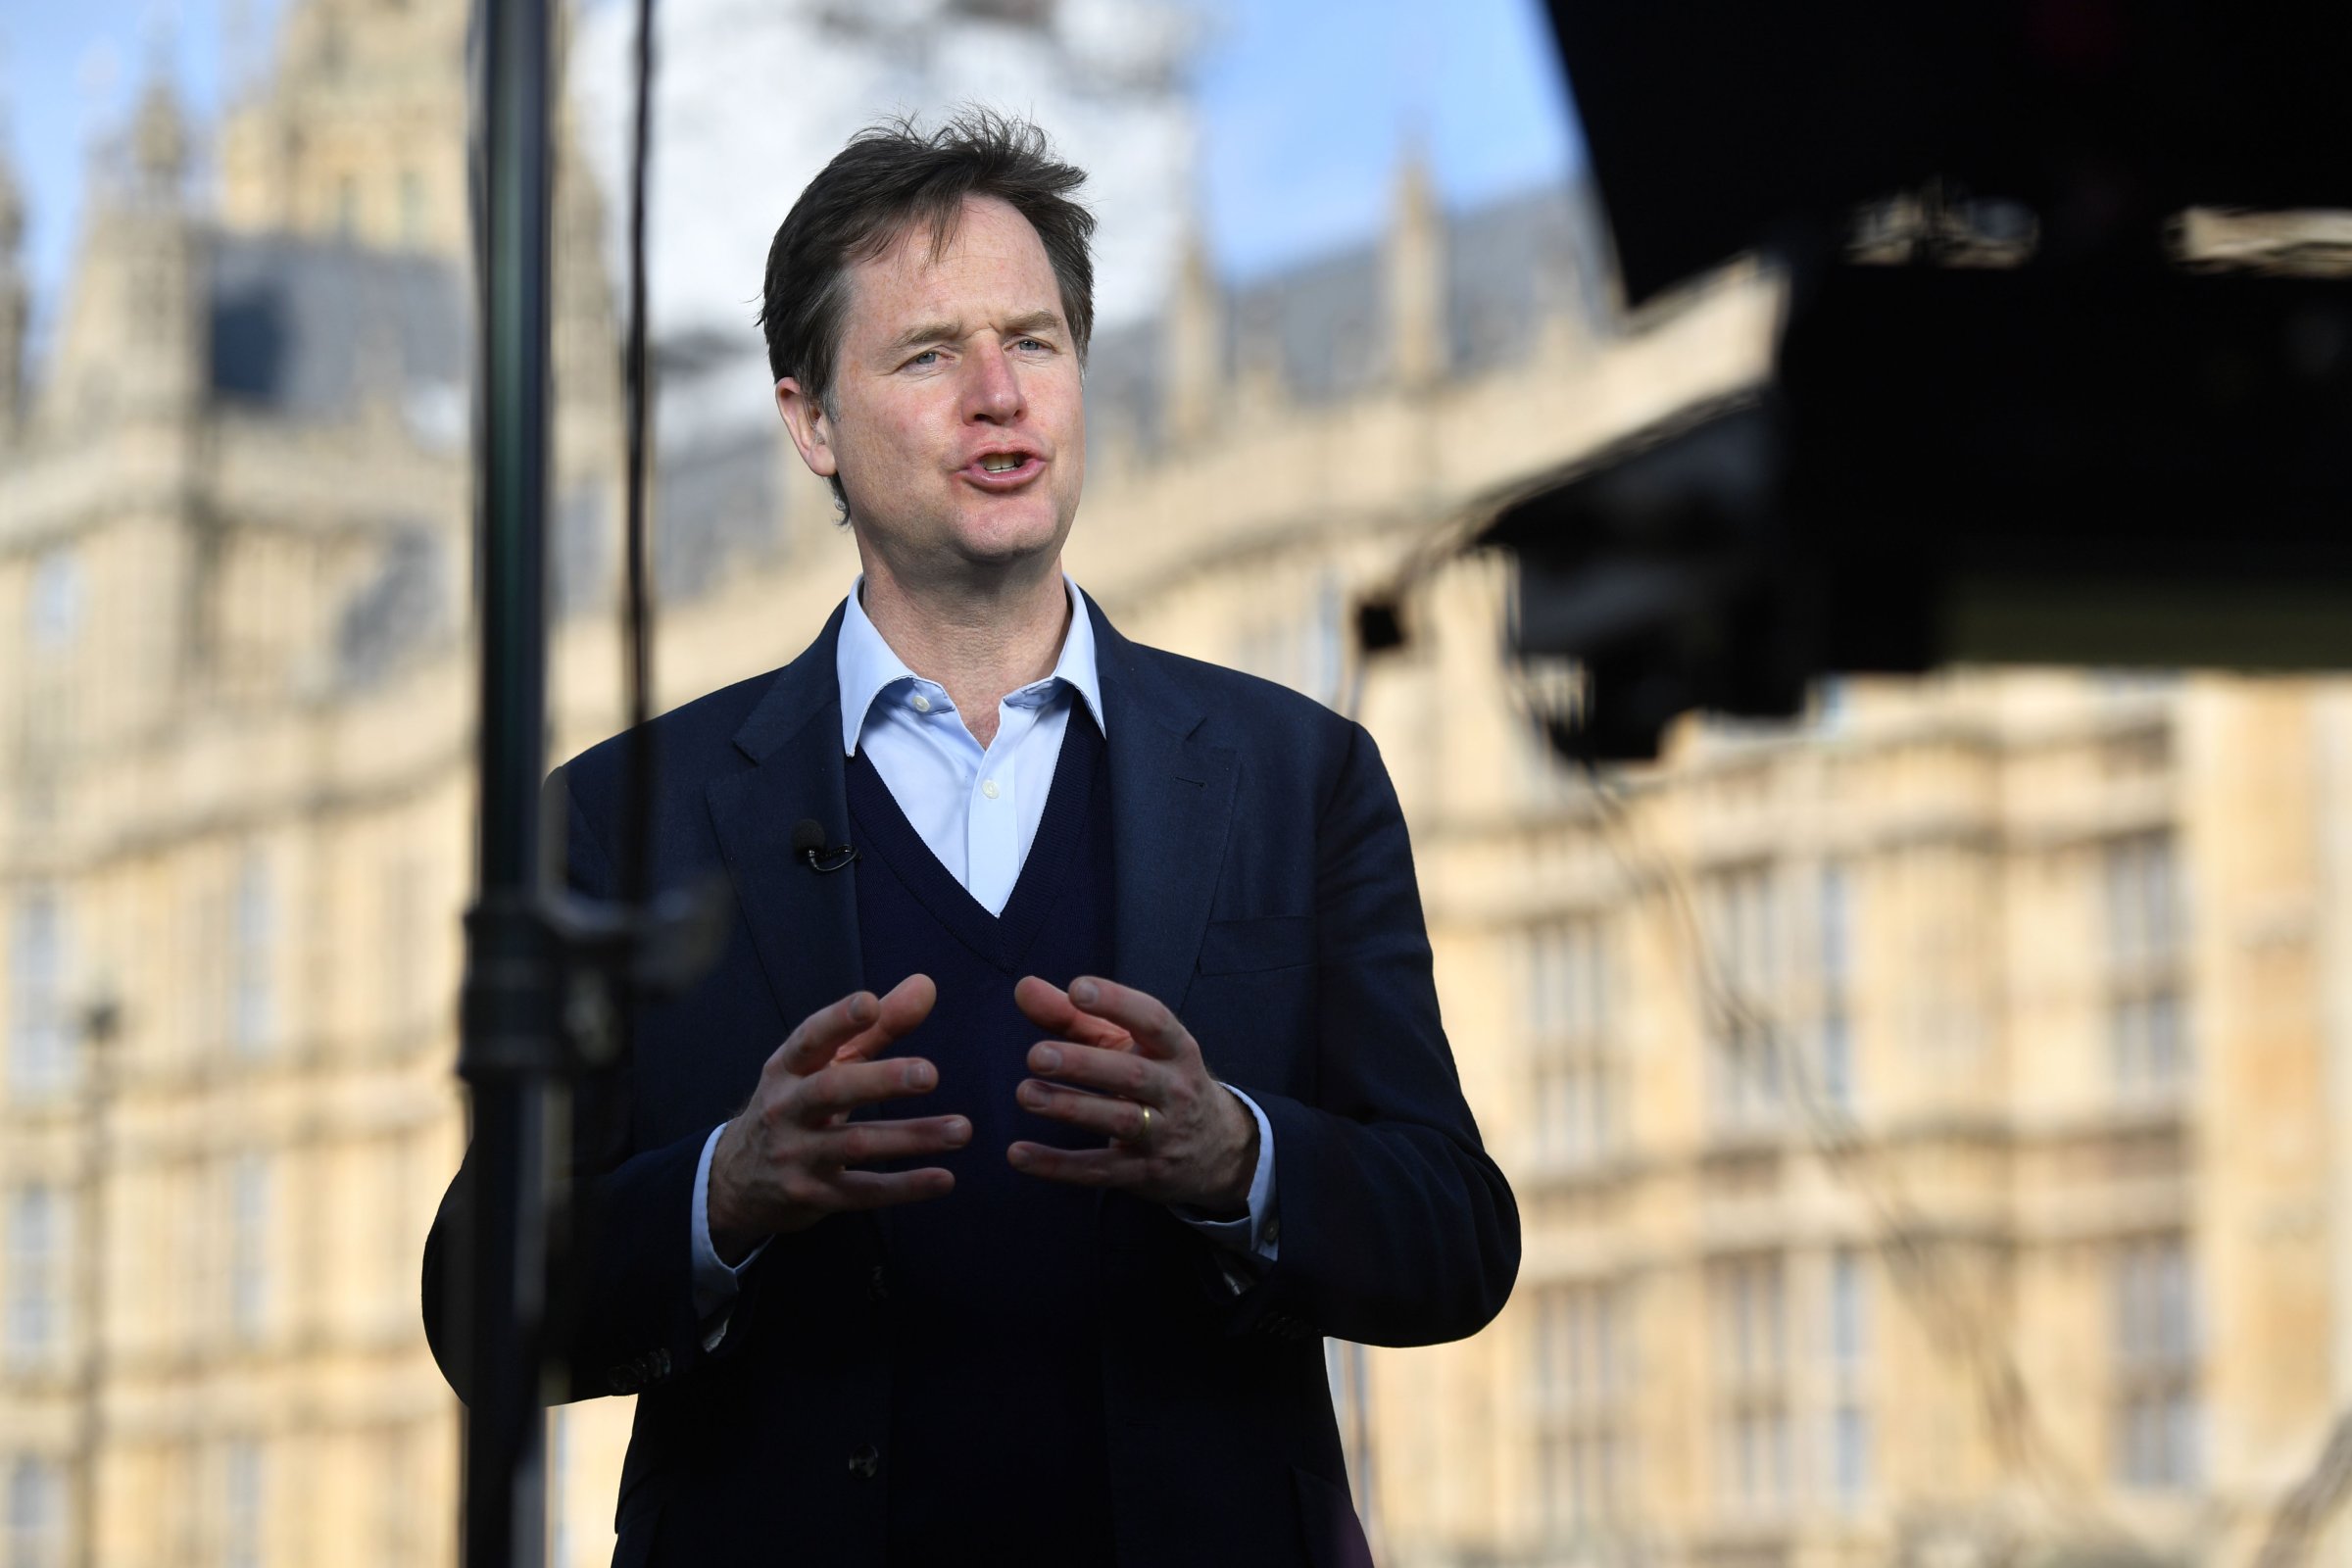 British Liberal Democrat politician, Nick Clegg chats to the media outside the Houses of Parliament in London on April 19, 2017.